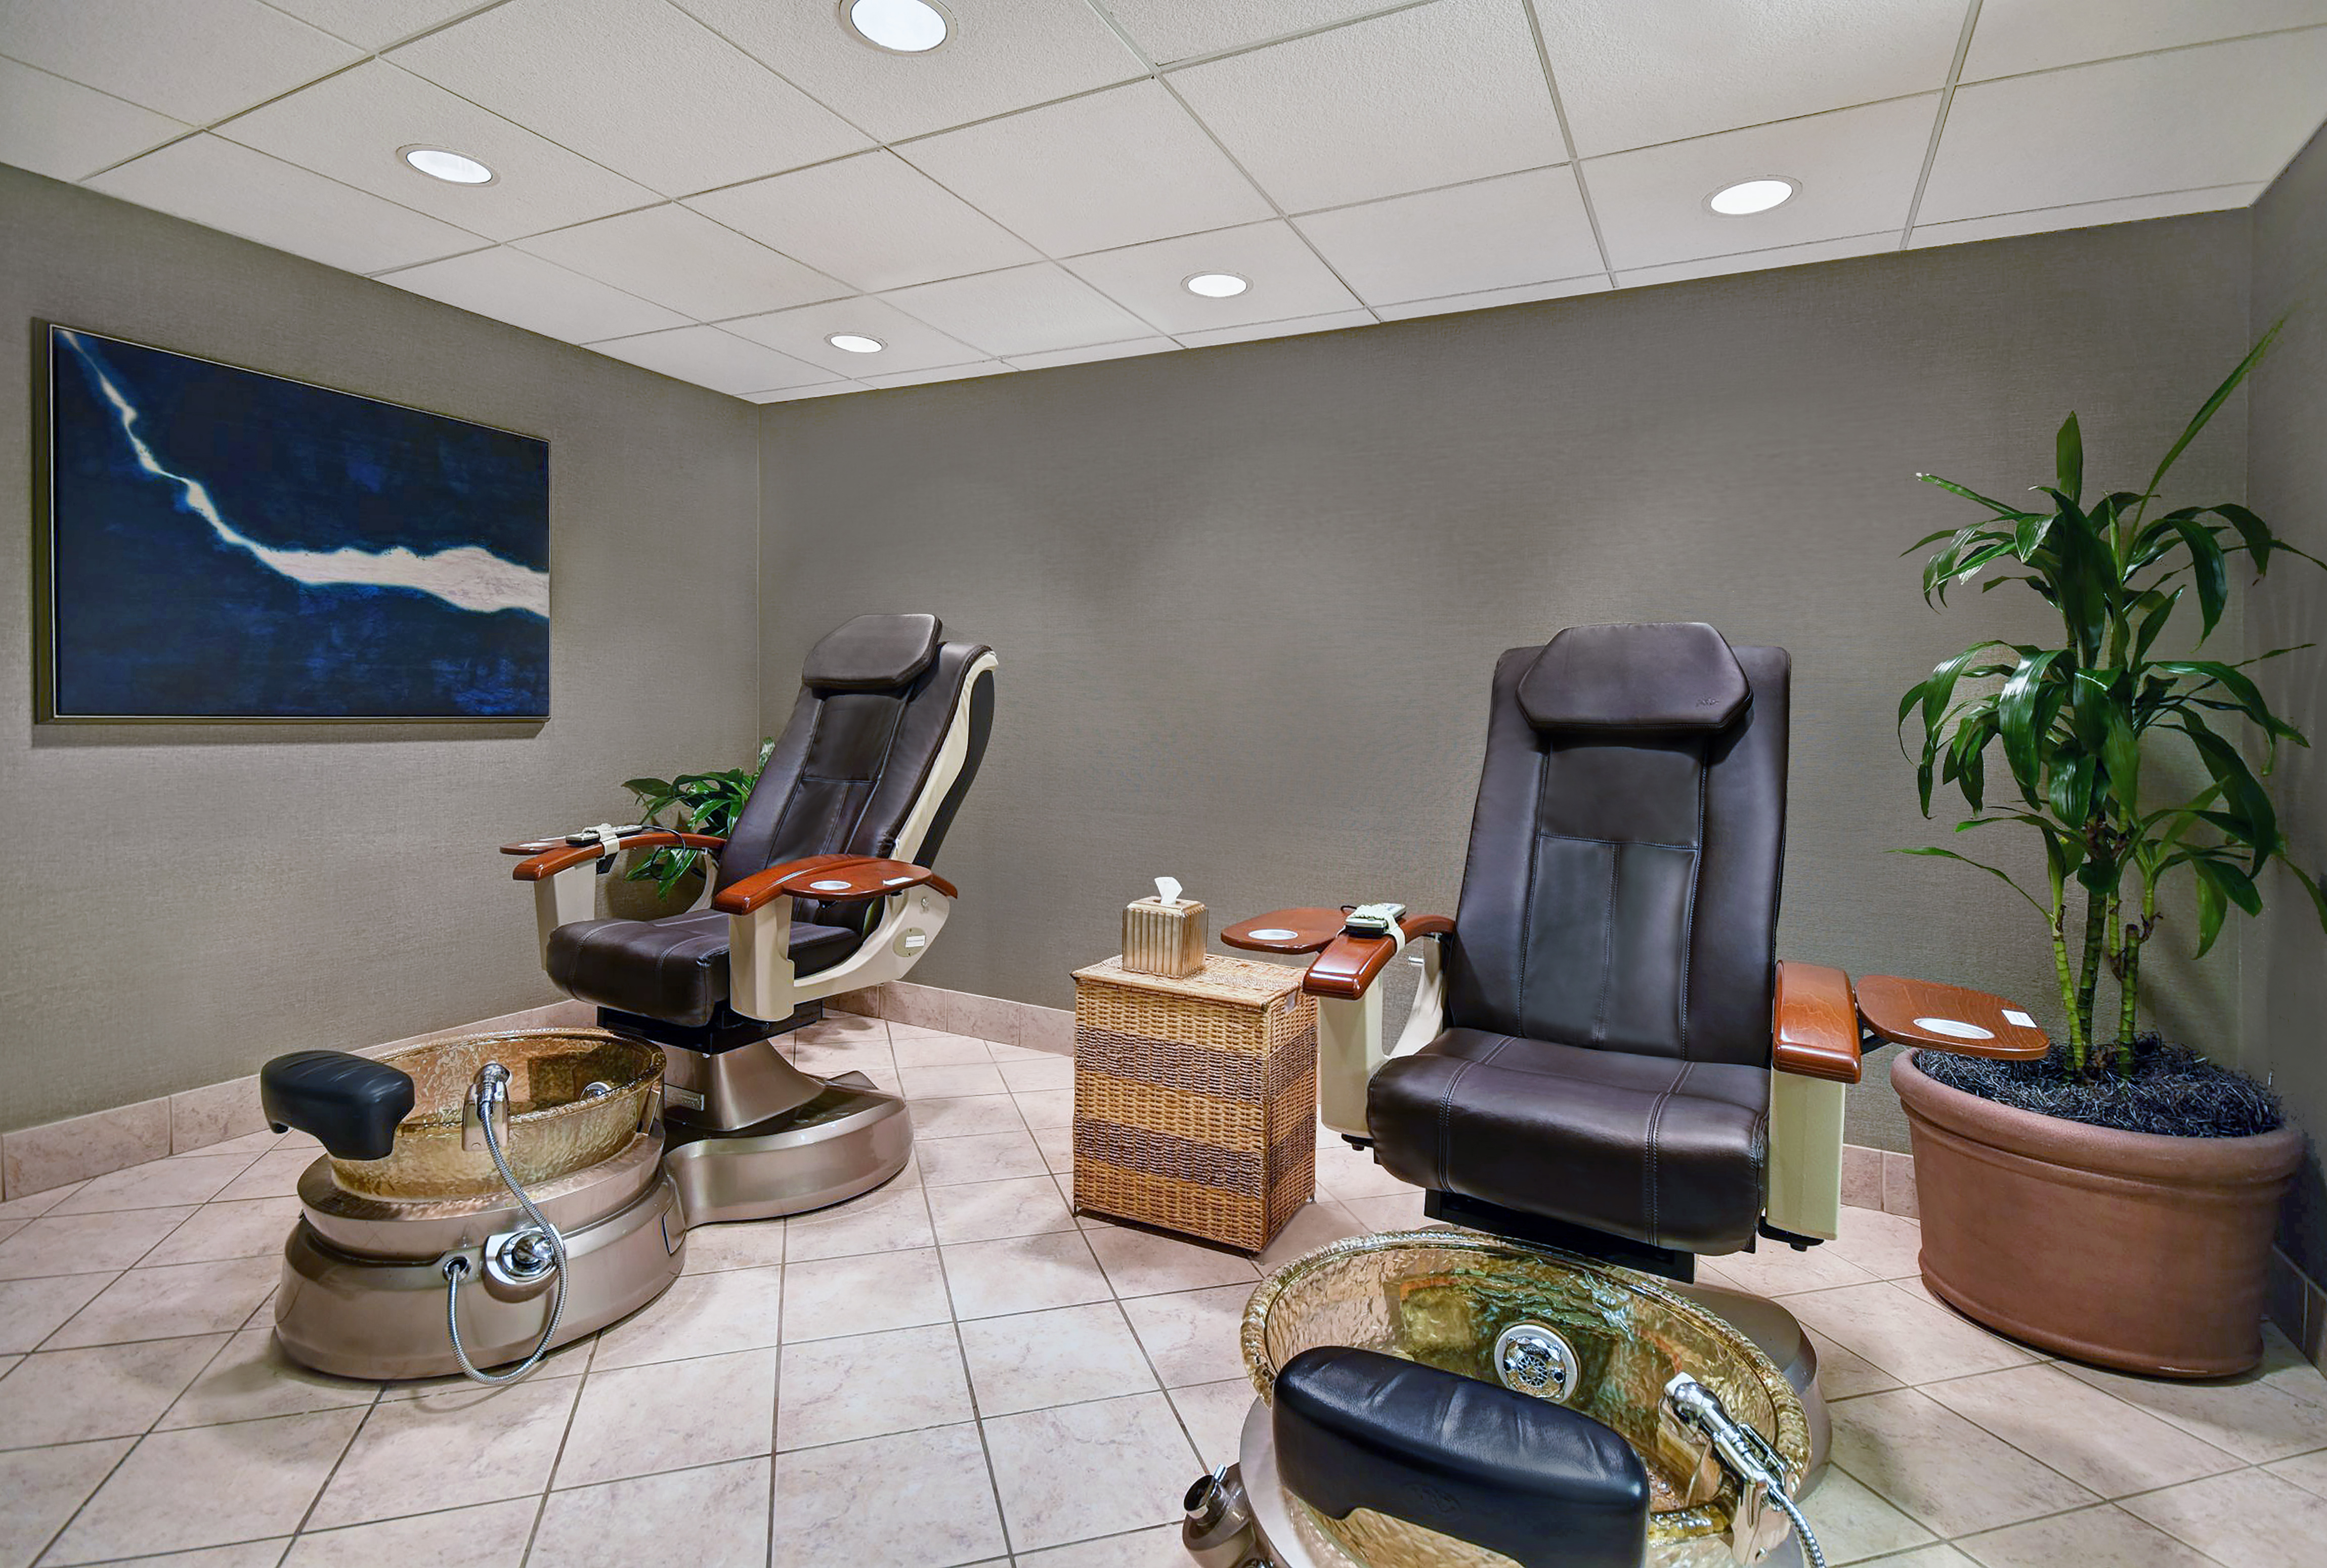 Spa pedicure chairs and foot baths